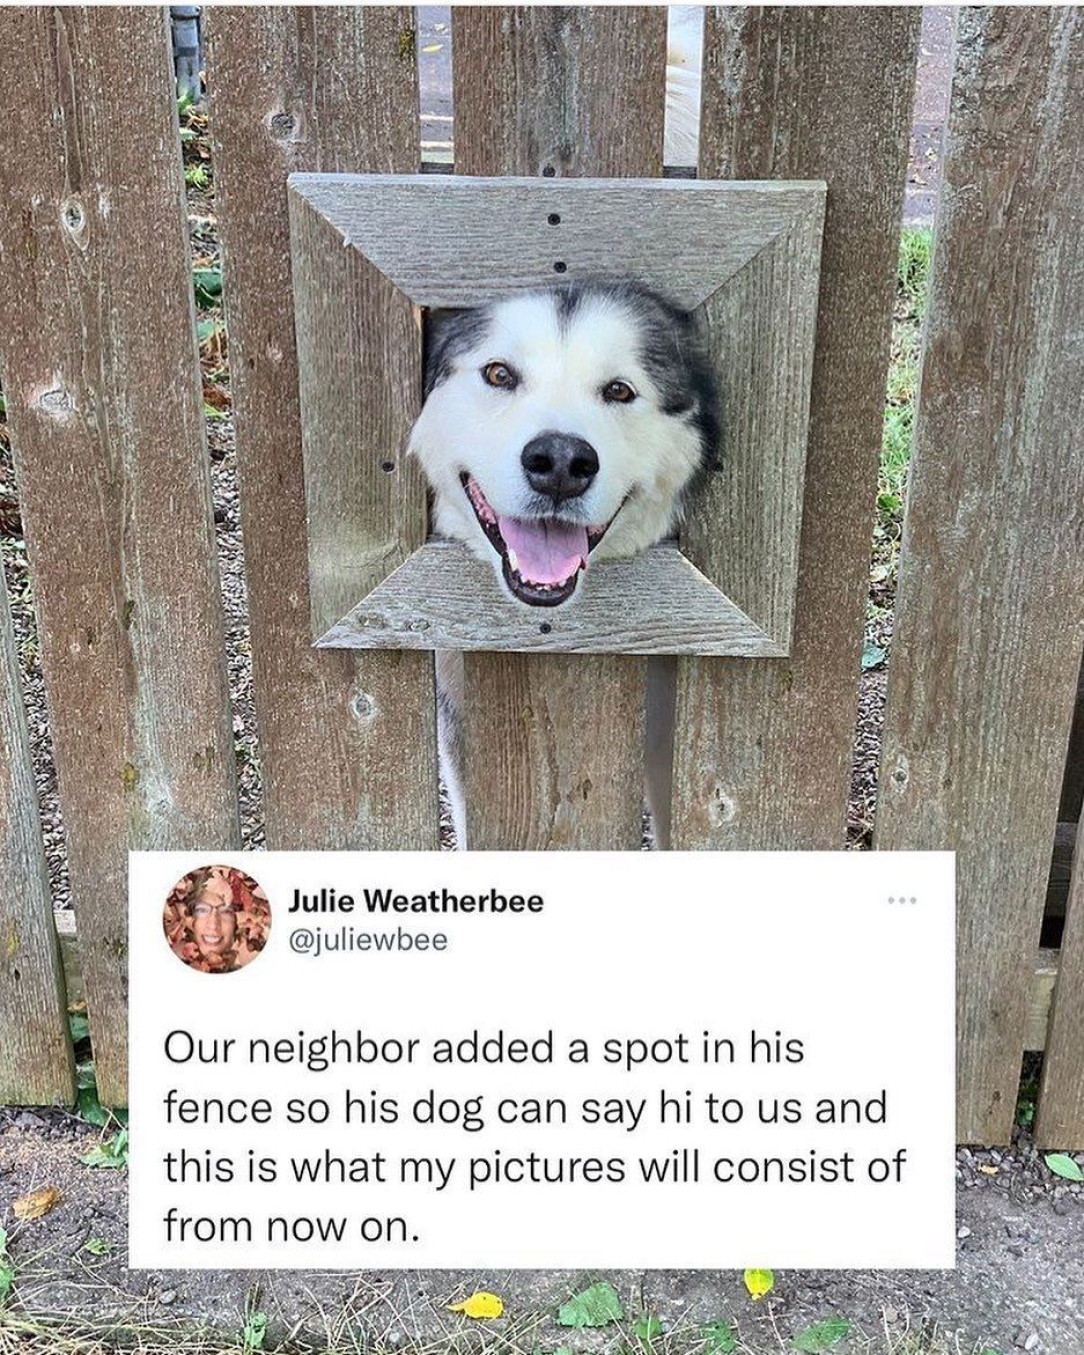 Very wholesome neighbours